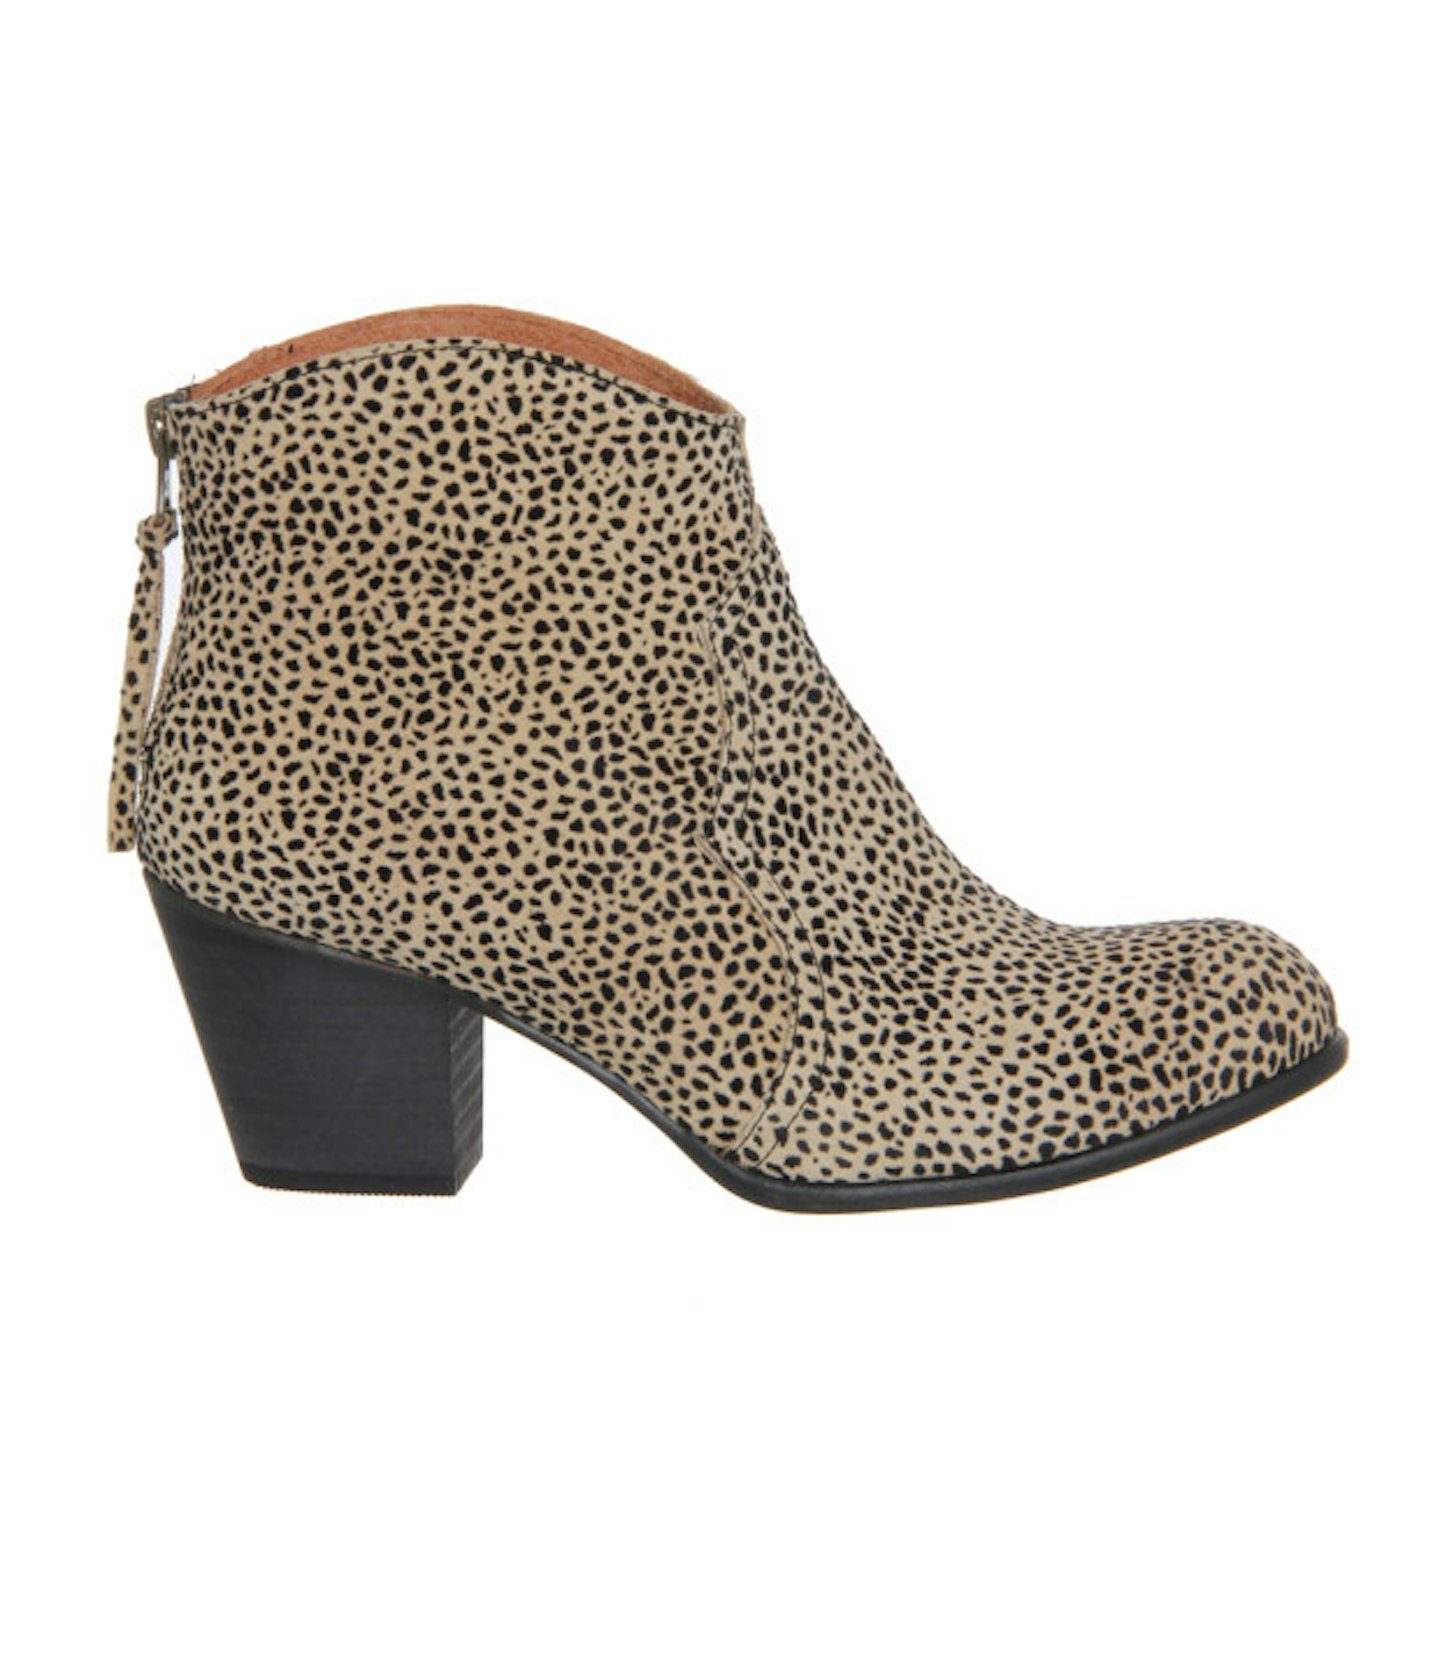 six-o-clock-shoes-office-leopard-boots-ankle